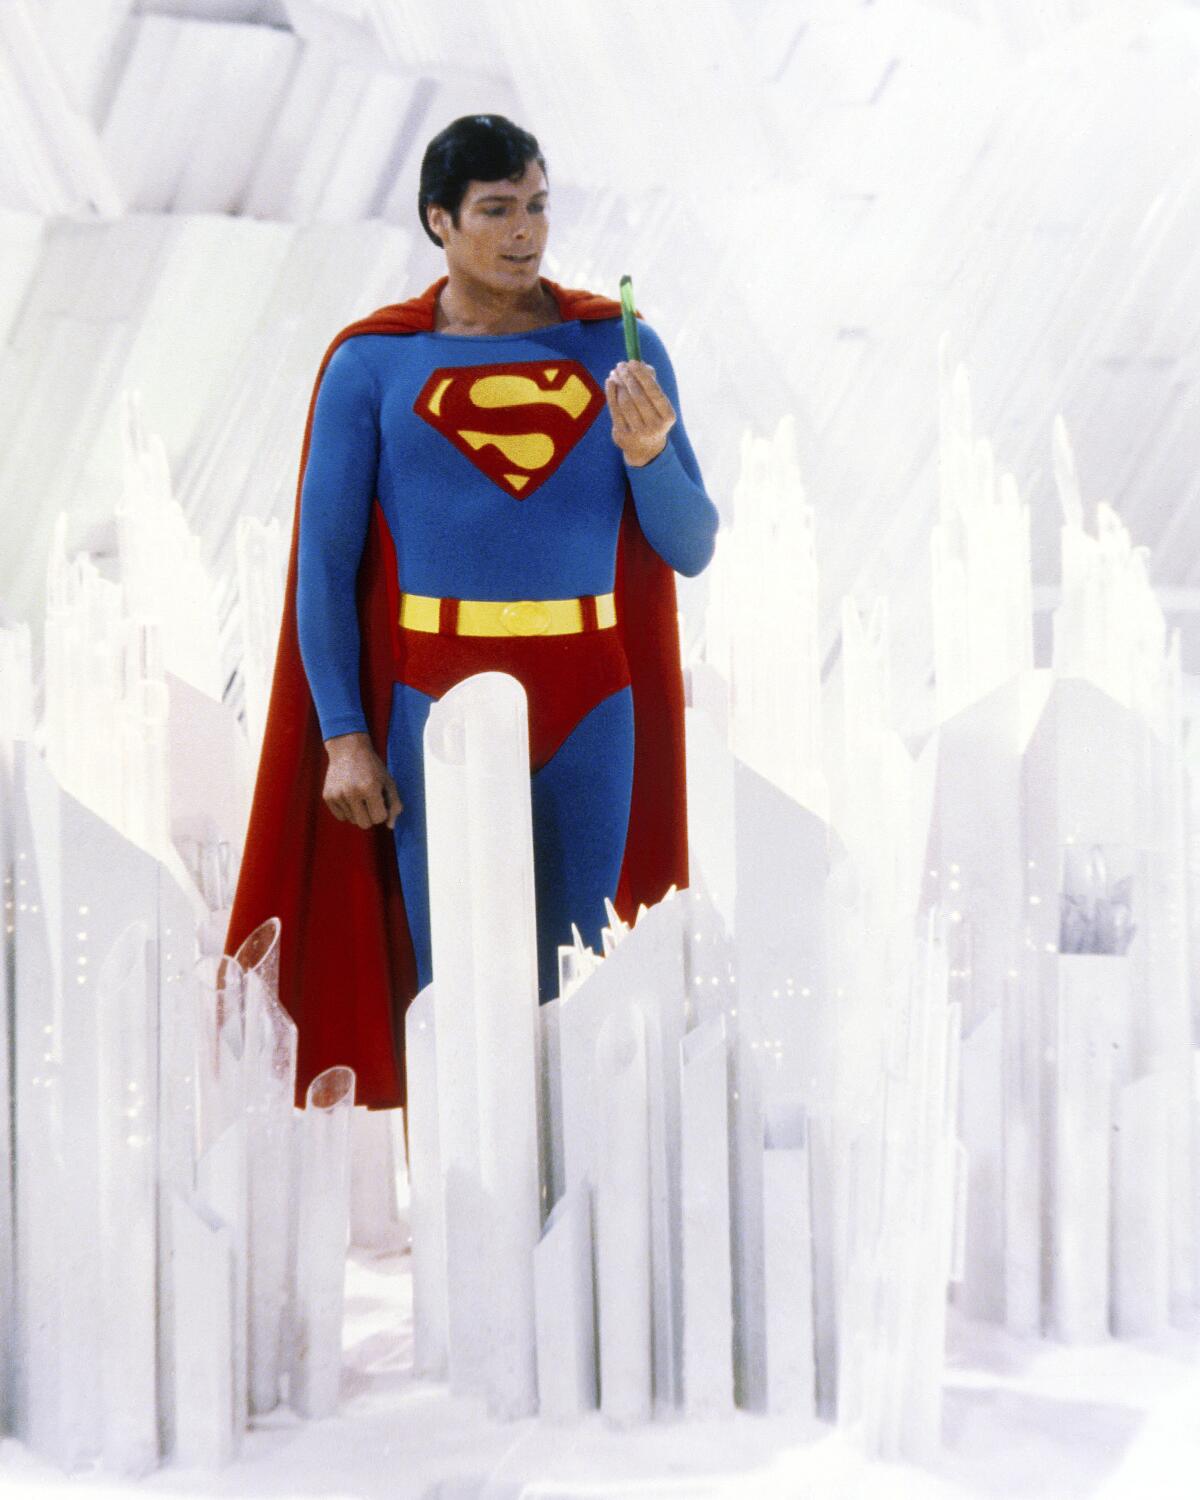 Superman, played by actor Christopher Reeve, holds a green crystal at the Fortress of Solitude.